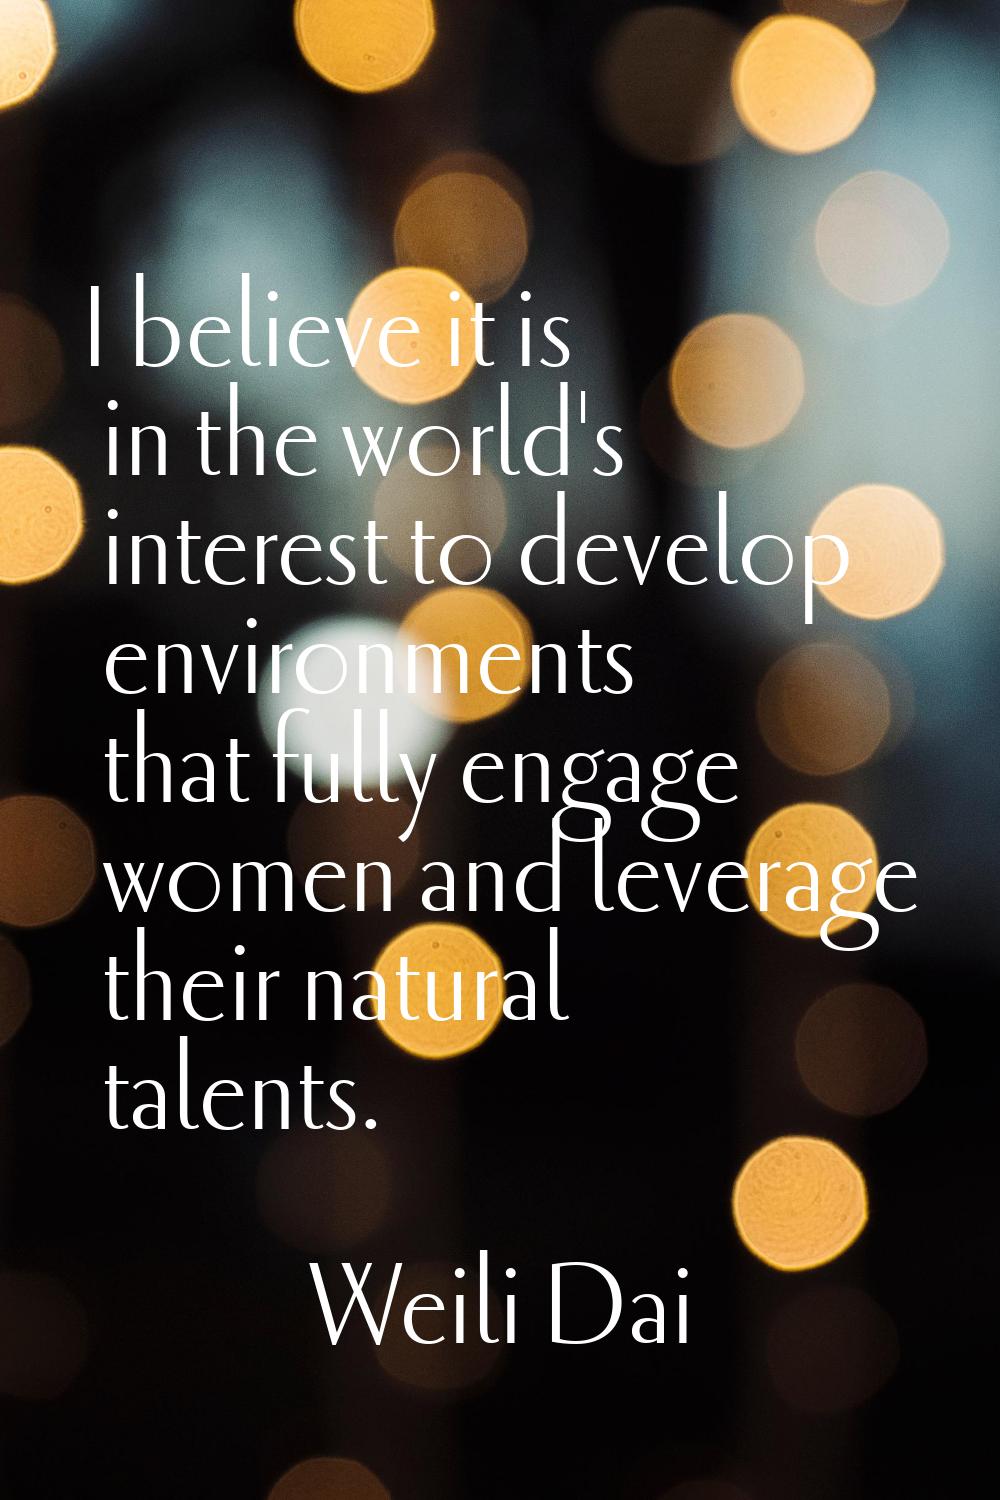 I believe it is in the world's interest to develop environments that fully engage women and leverag